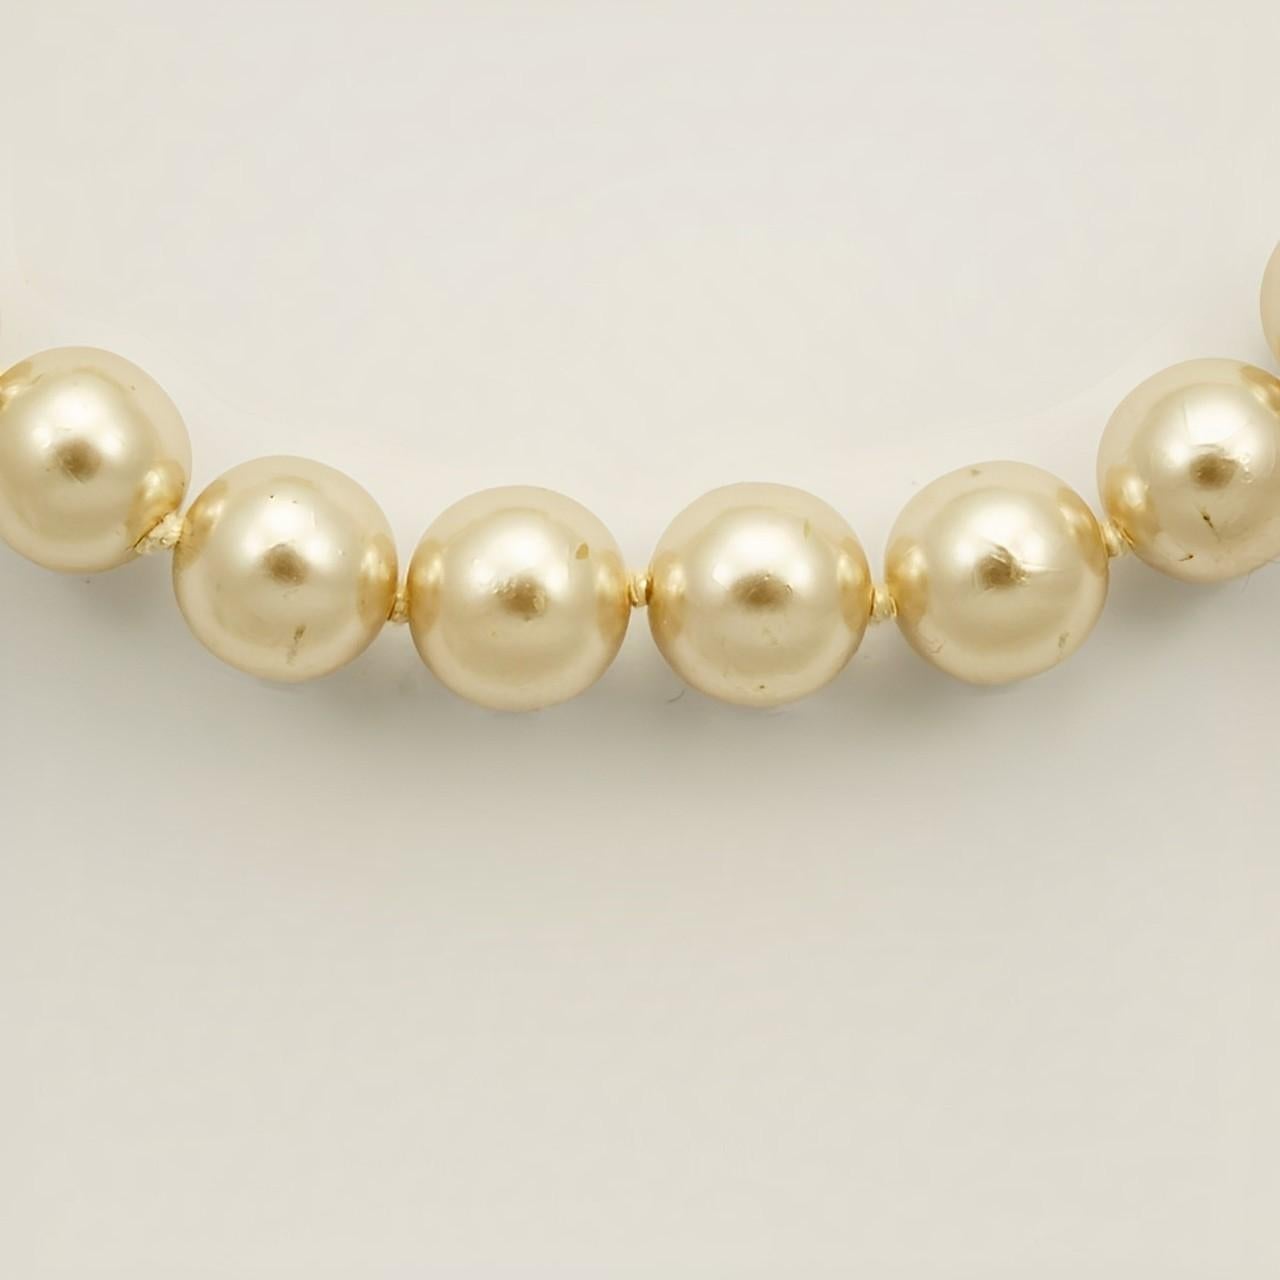 Round Cut Champagne Glass Pearl Necklace with a Silver Tone and Rhinestone Clasp For Sale